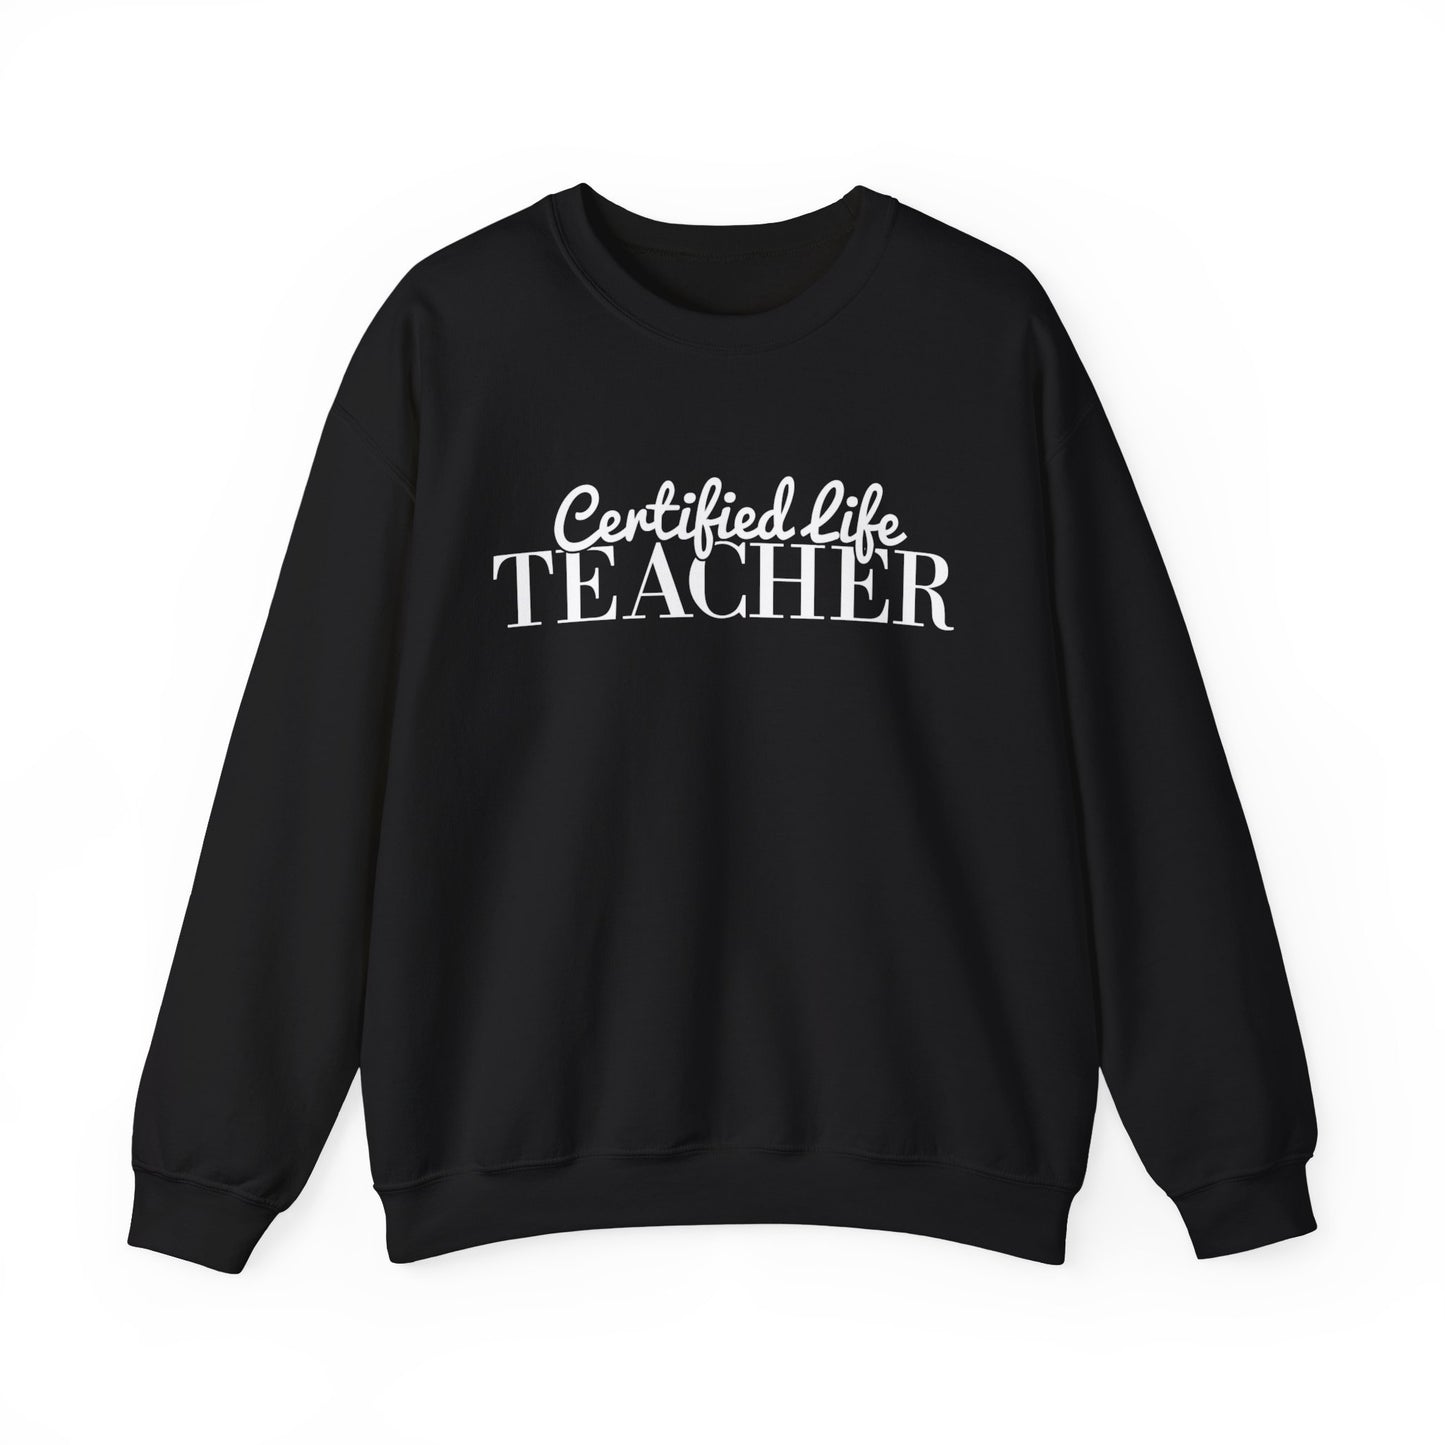 Images showcasing the sweatshirt being worn by a homeschooling parent, perhaps in a teaching setting or casually.